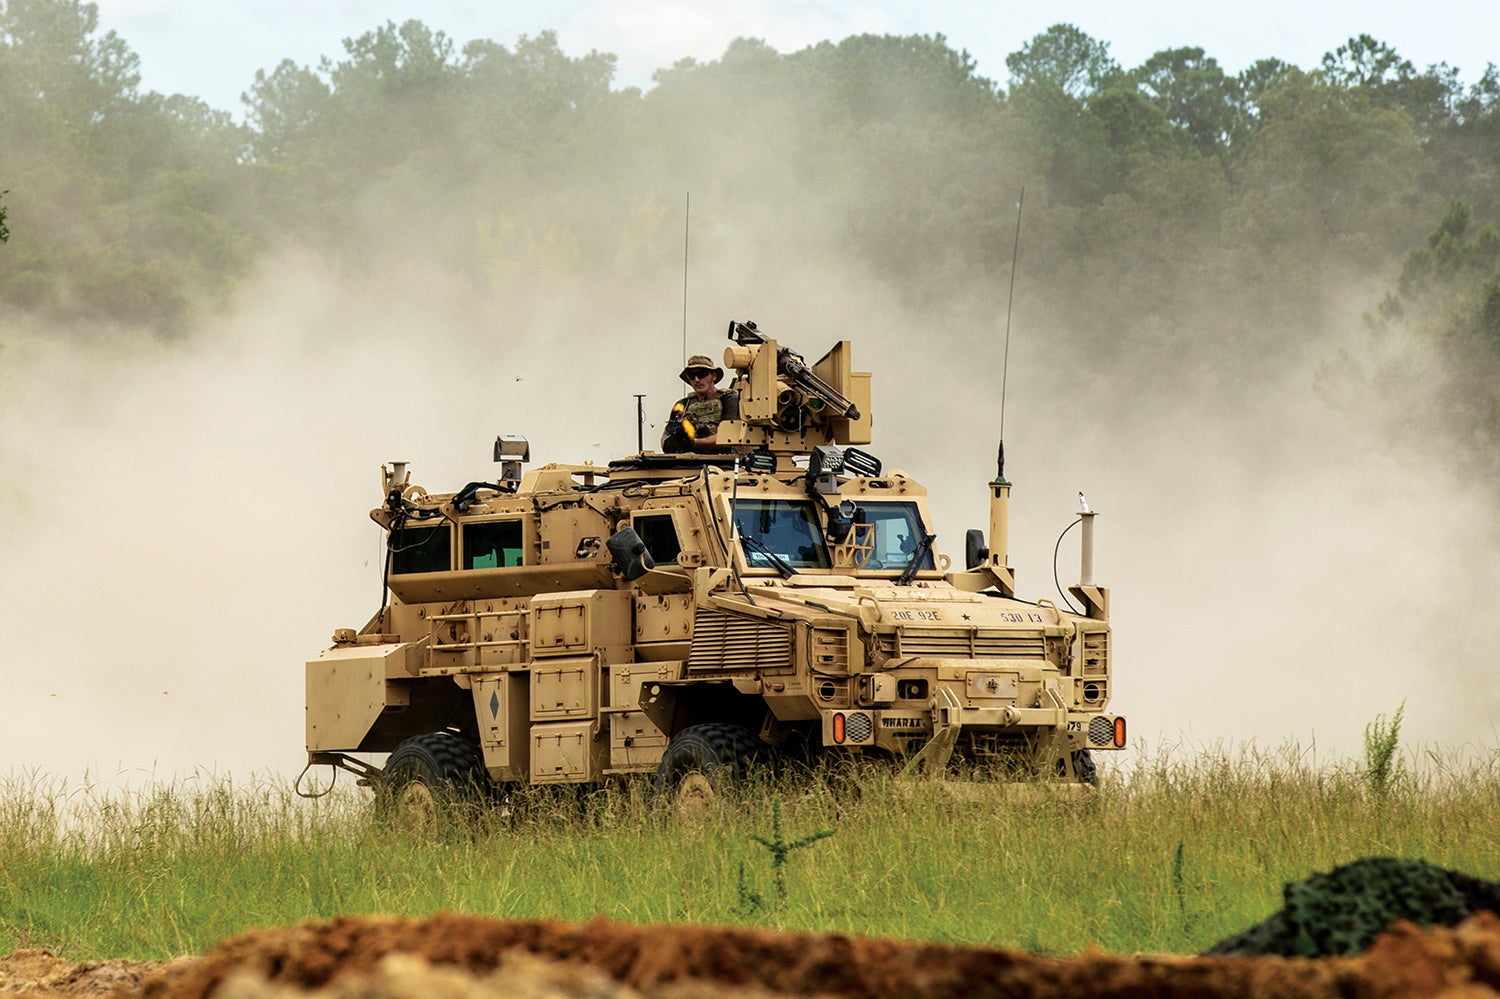 A soldier with the 92nd Engineer Battalion fires from an MRAP during a validation exercise at Fort Stewart, Georgia. (Credit: U.S. Army/Sgt. William Griffen)